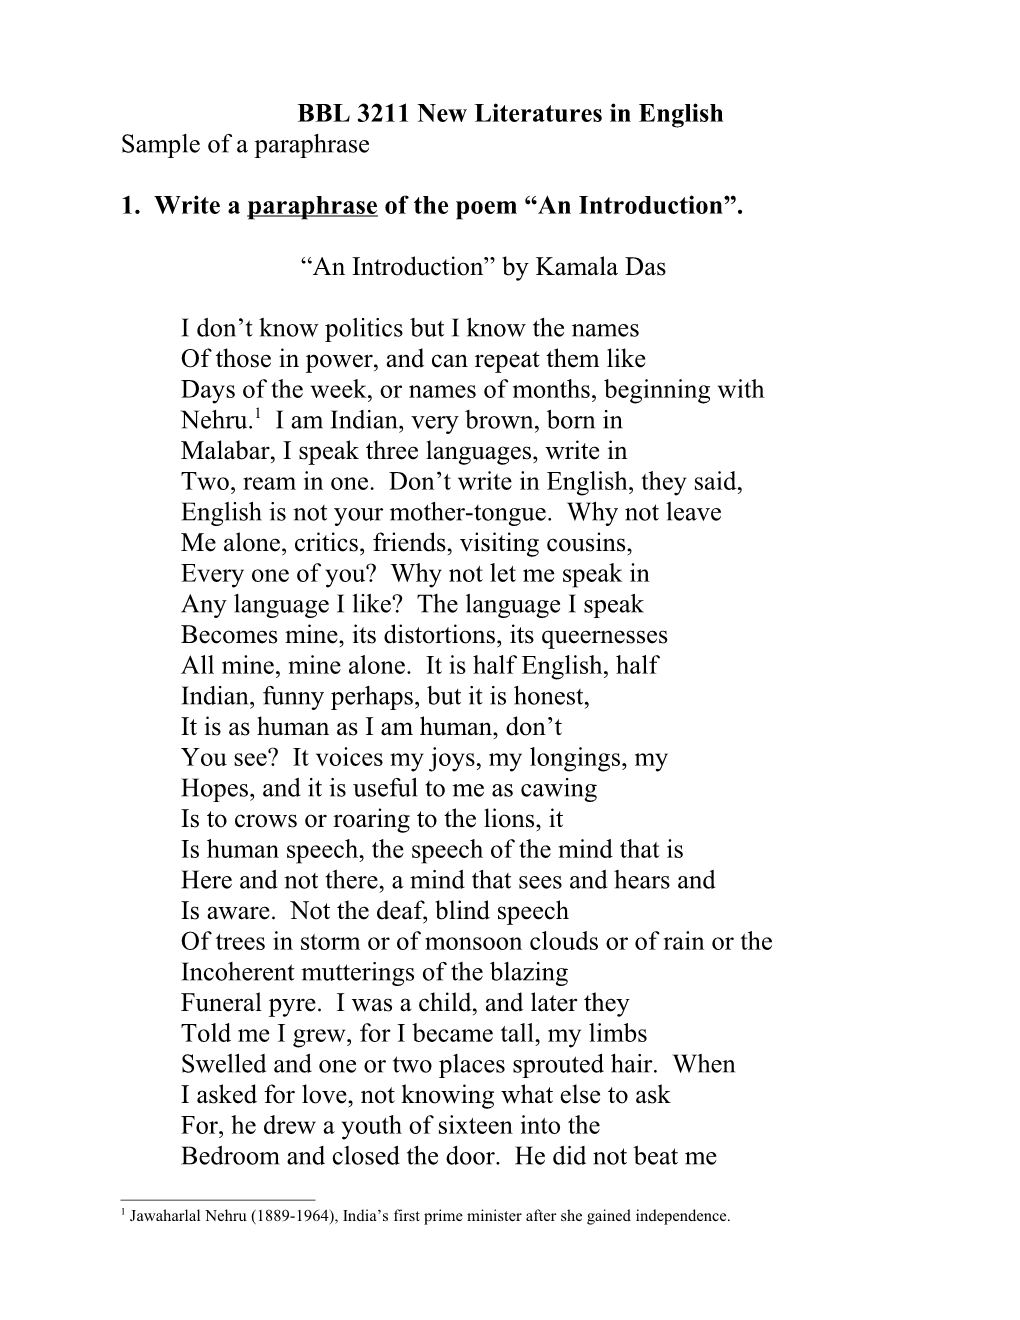 1. Write a Paraphrase of the Poem an Introduction